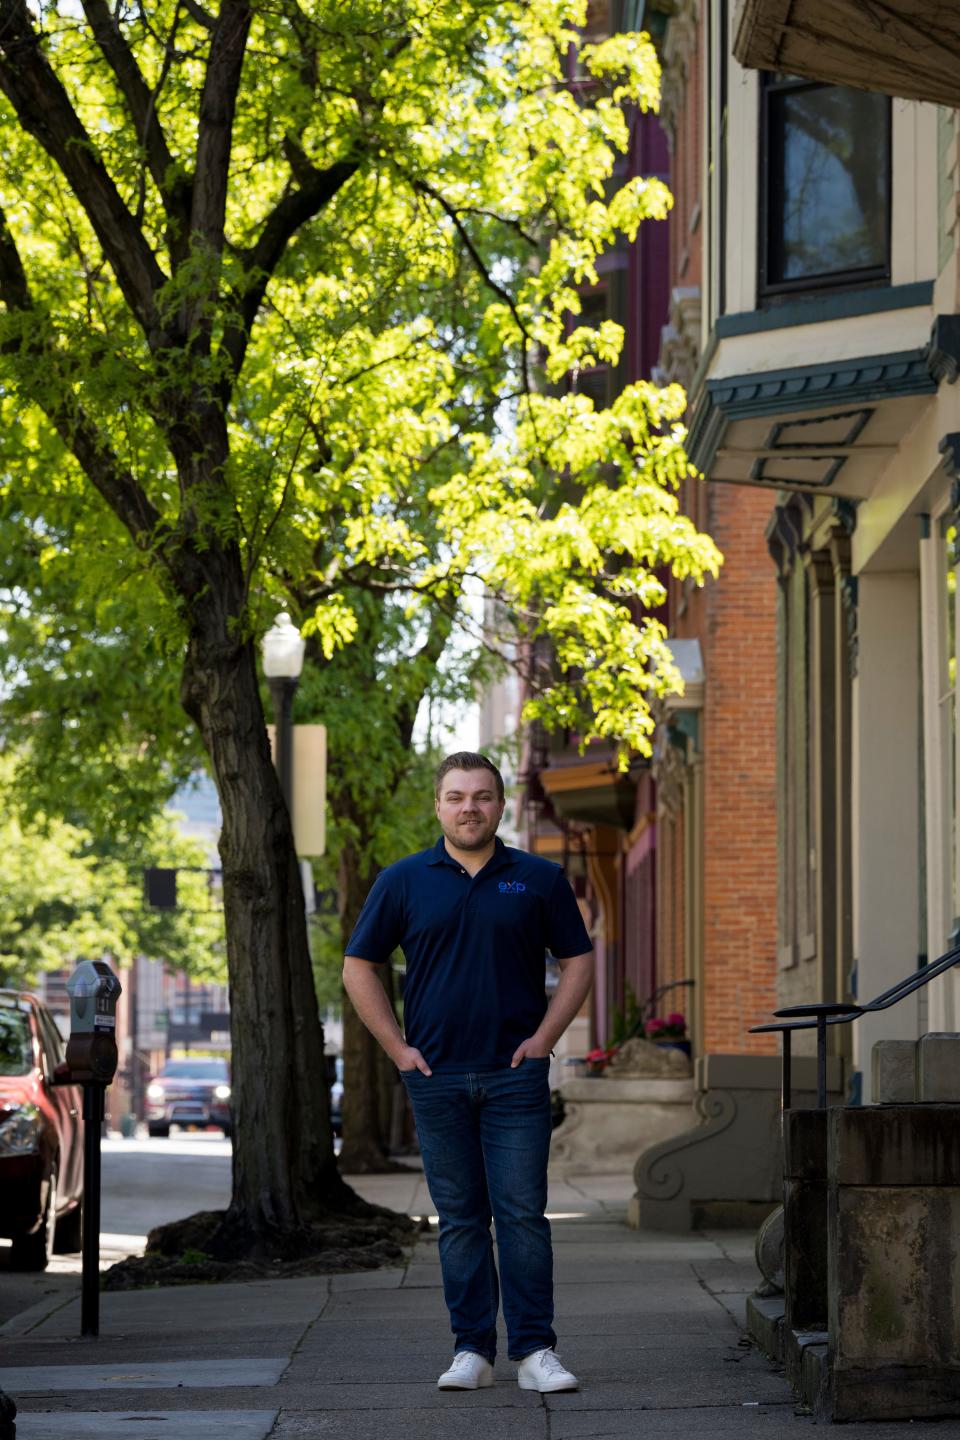 Realtor Andrew Maloney moved downtown from the West Side four years ago and has watched the neighborhood change over the course of the pandemic. New venues like Five Iron Golf and the activities sponsored by 3CDC are "bringing Downtown back," he said.